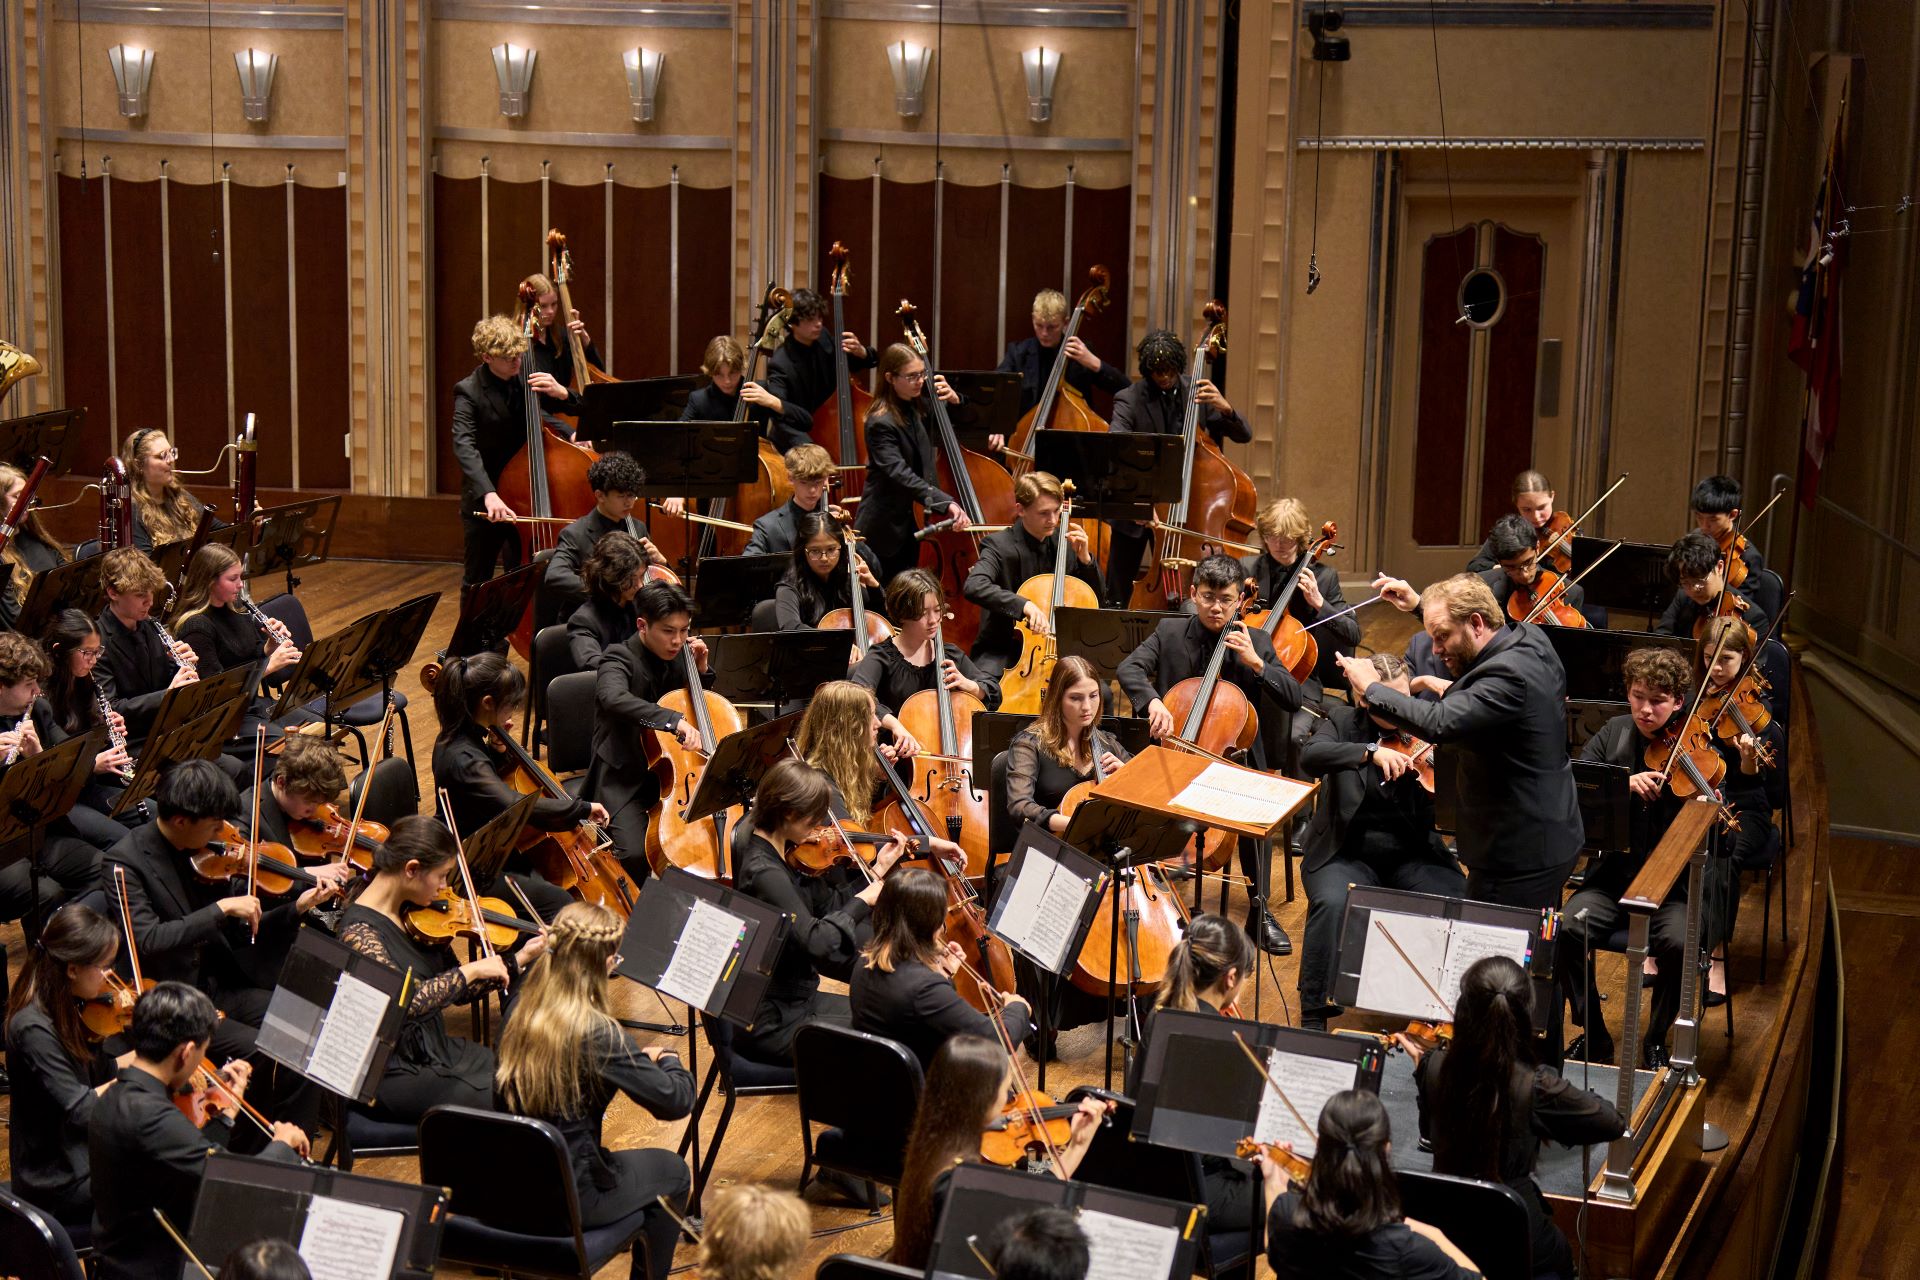 Daniel Reith conducts the Cleveland Orchestra Youth Orchestra